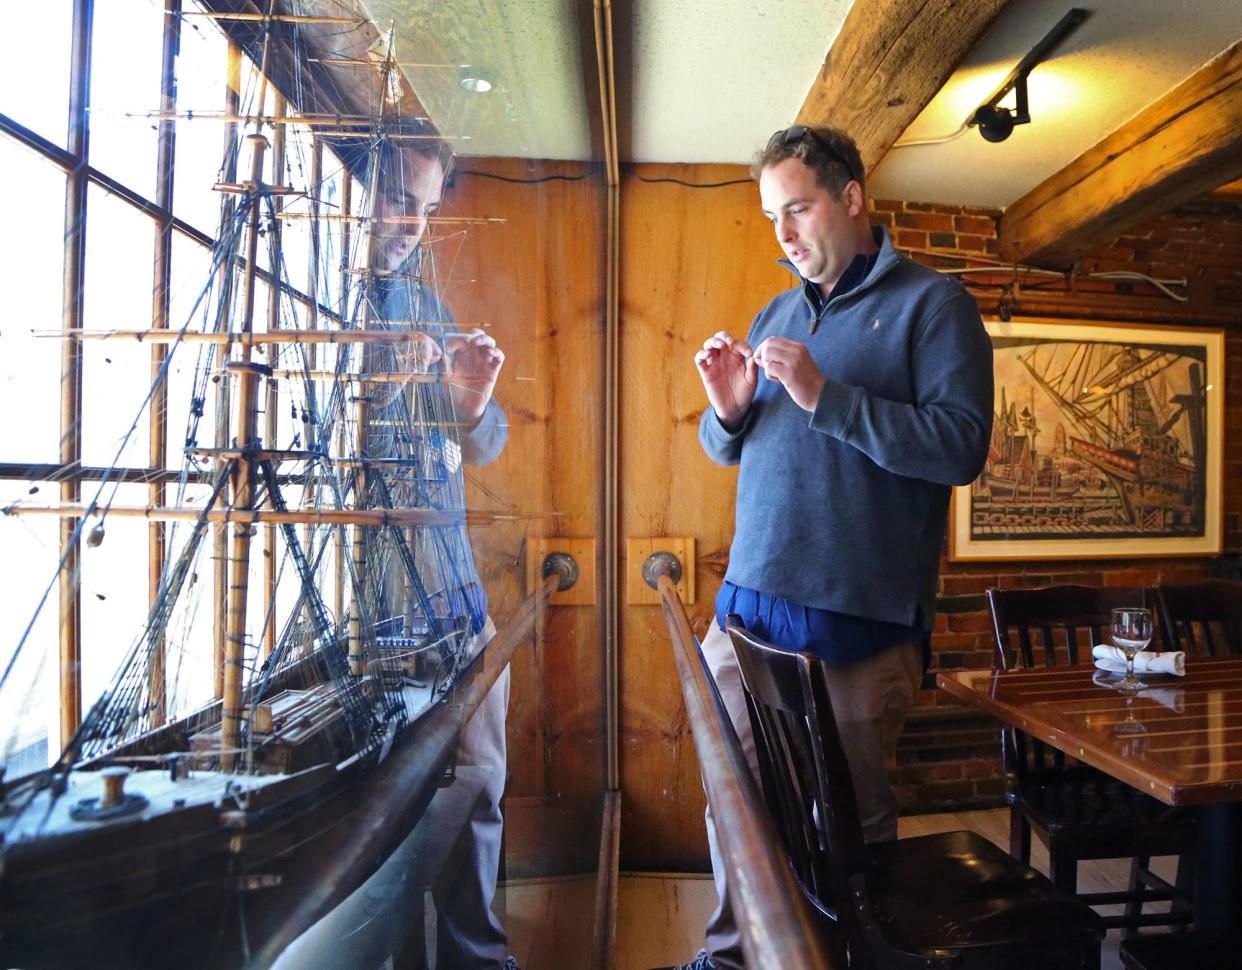 Oar House restaurant owner Casey Anderson talks about the model of a Portsmouth-built vessel The Witch of the Wave and the rich history of ship building locally.